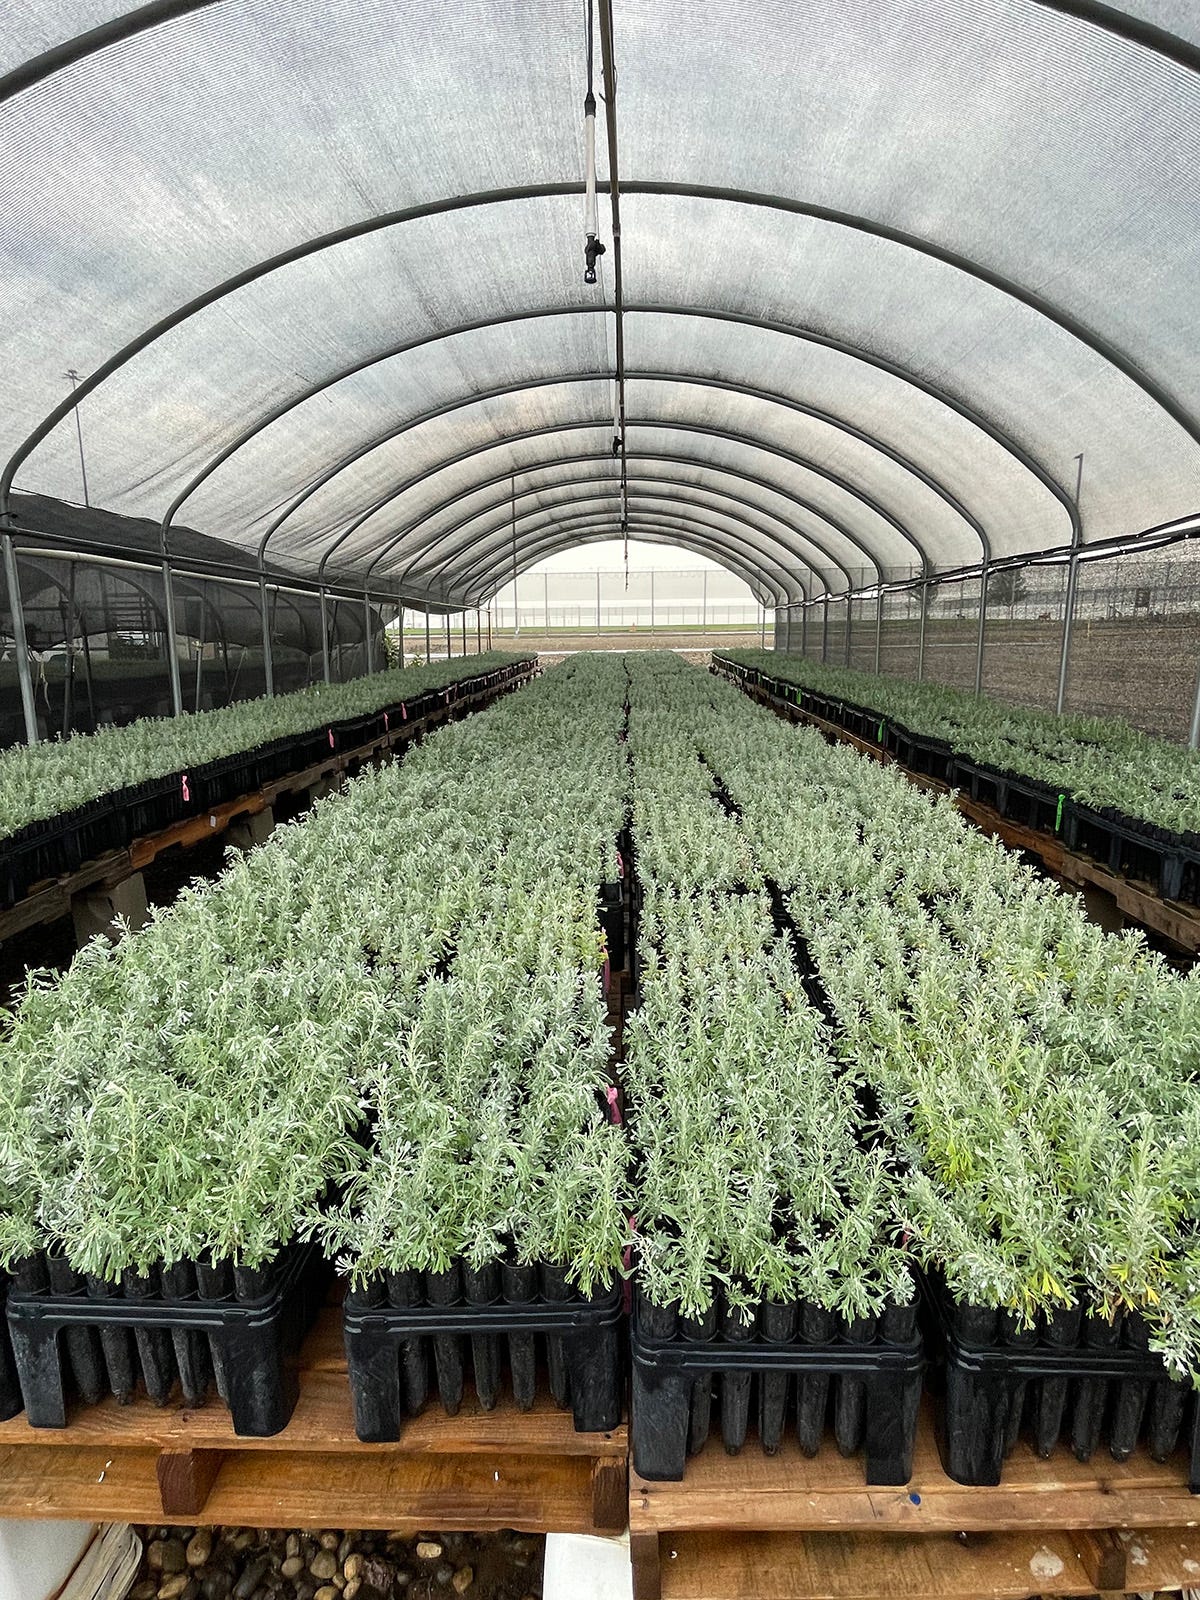 Long rows of sagebrush starts in a greenhouse, the razor-wired fences of a prison in the background.